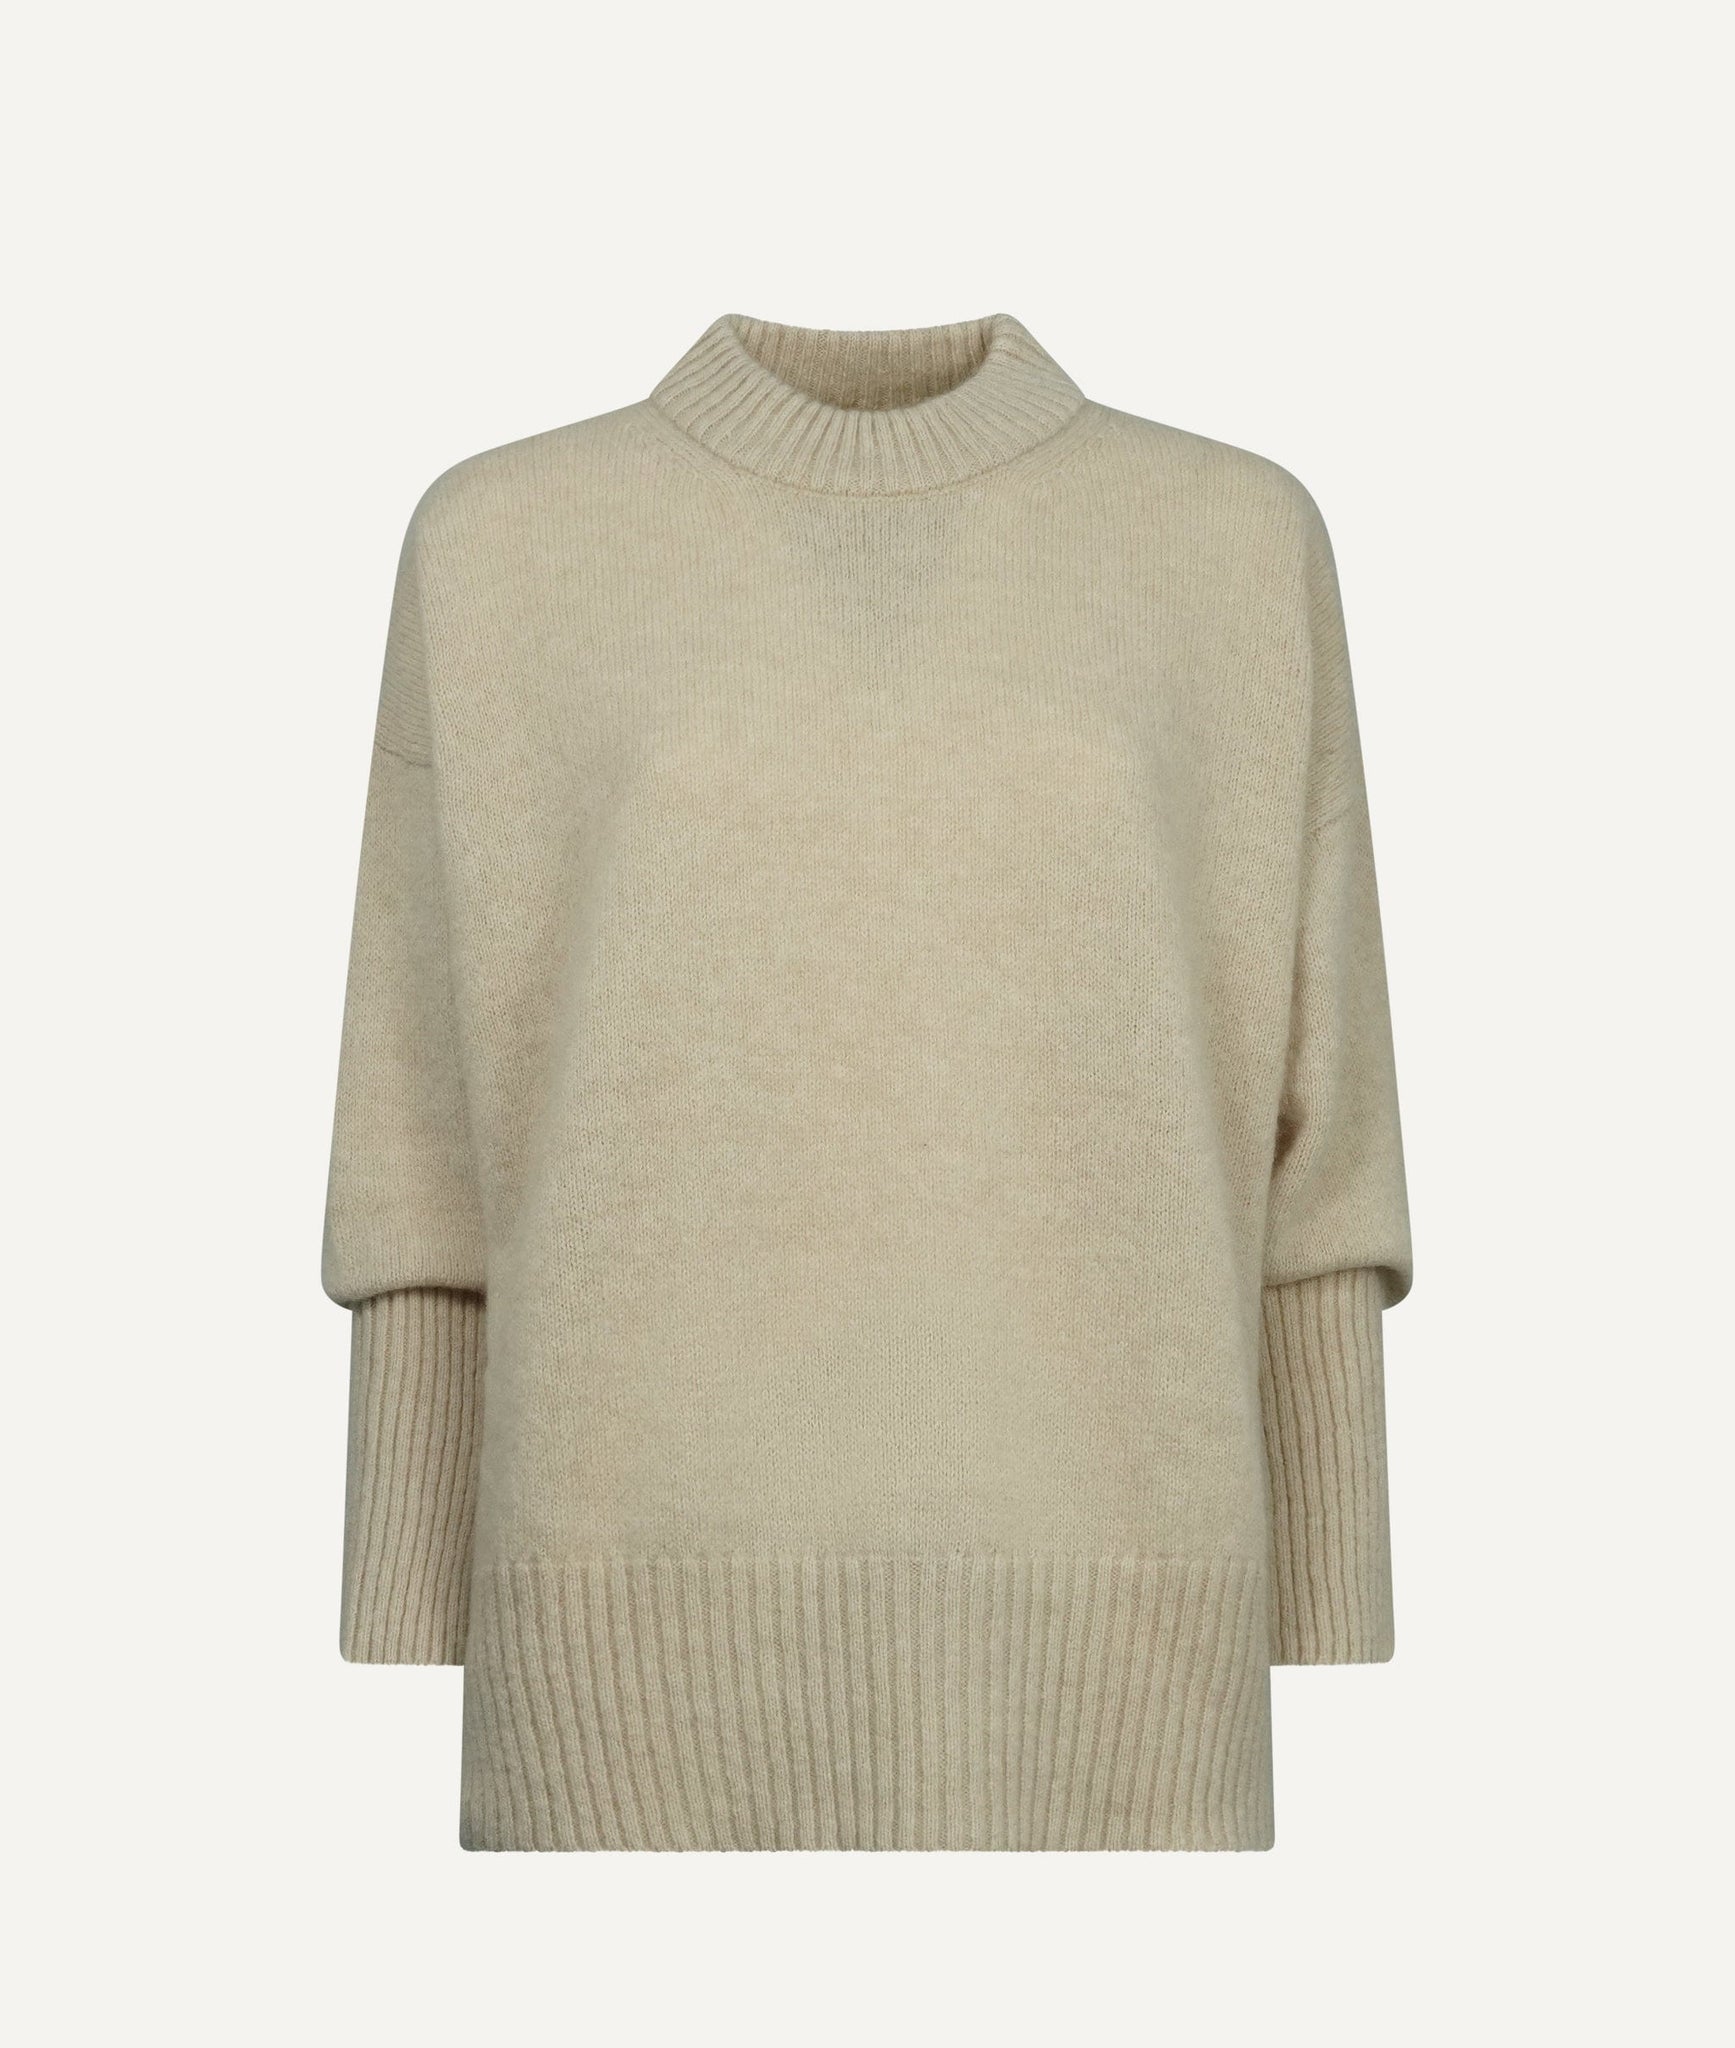 Fedeli - Roundneck in Wool & Cashmere